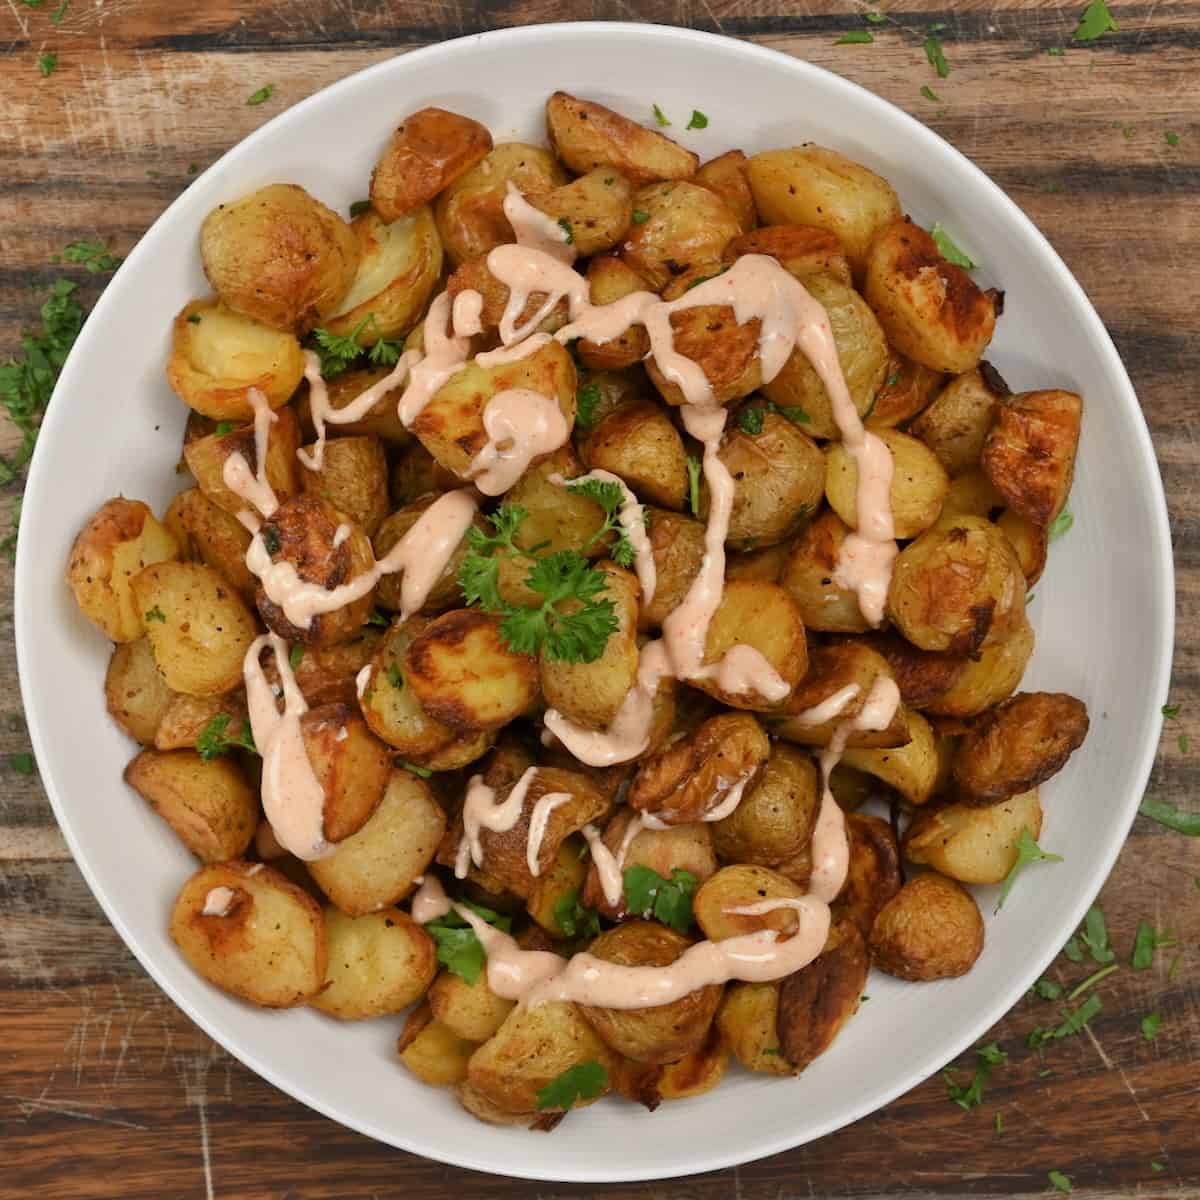 Crispy roasted potatoes served with sauce